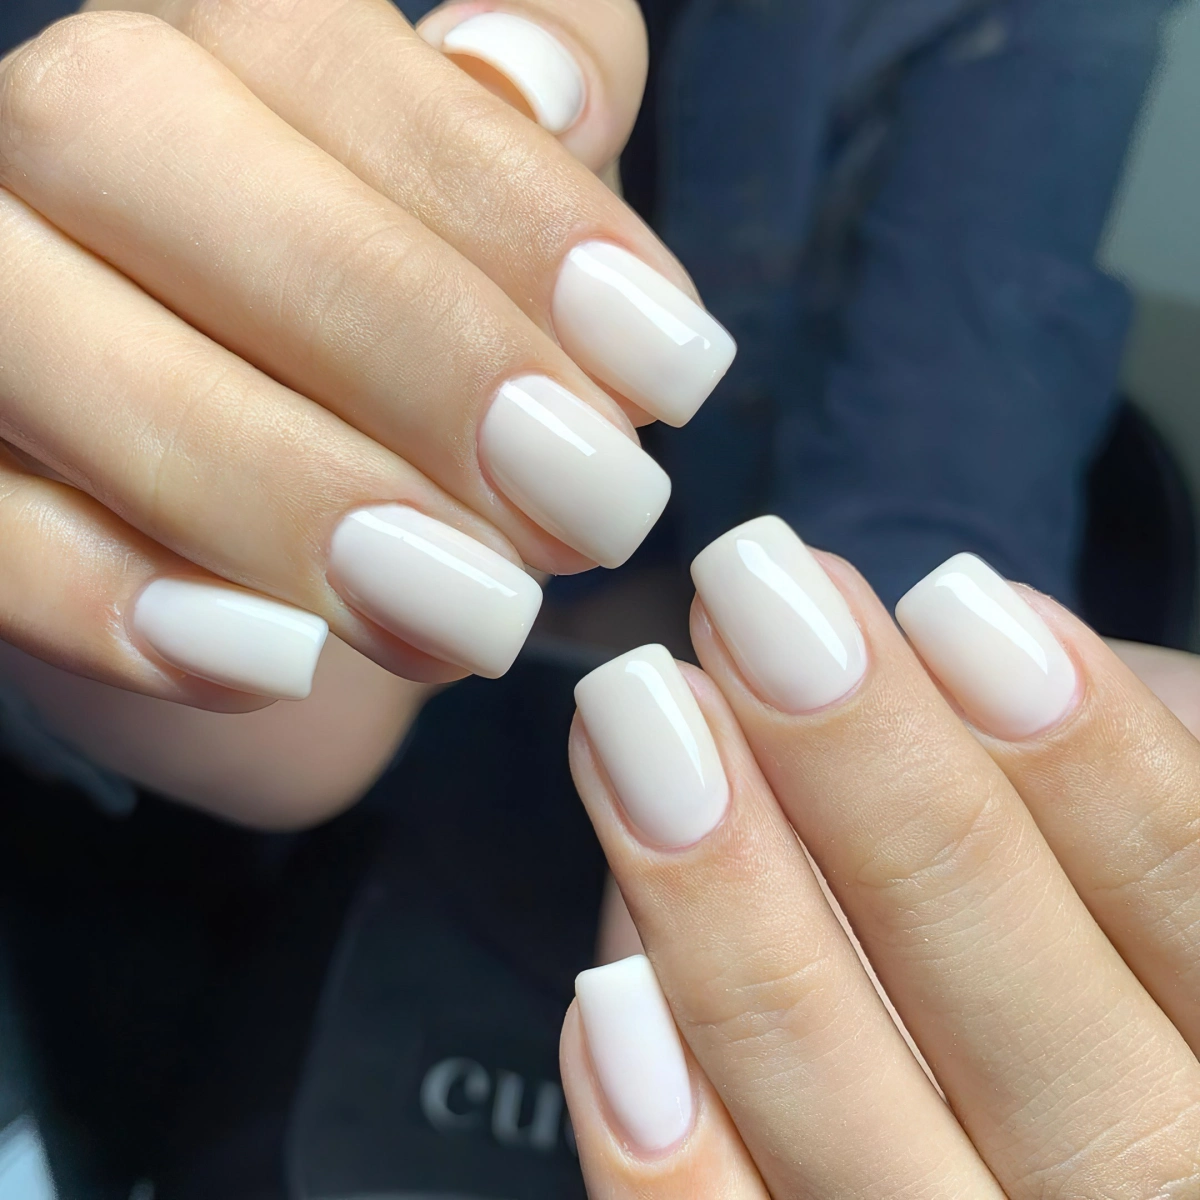 vernis couleur milky white tendance ongles mariage naturel mains femme